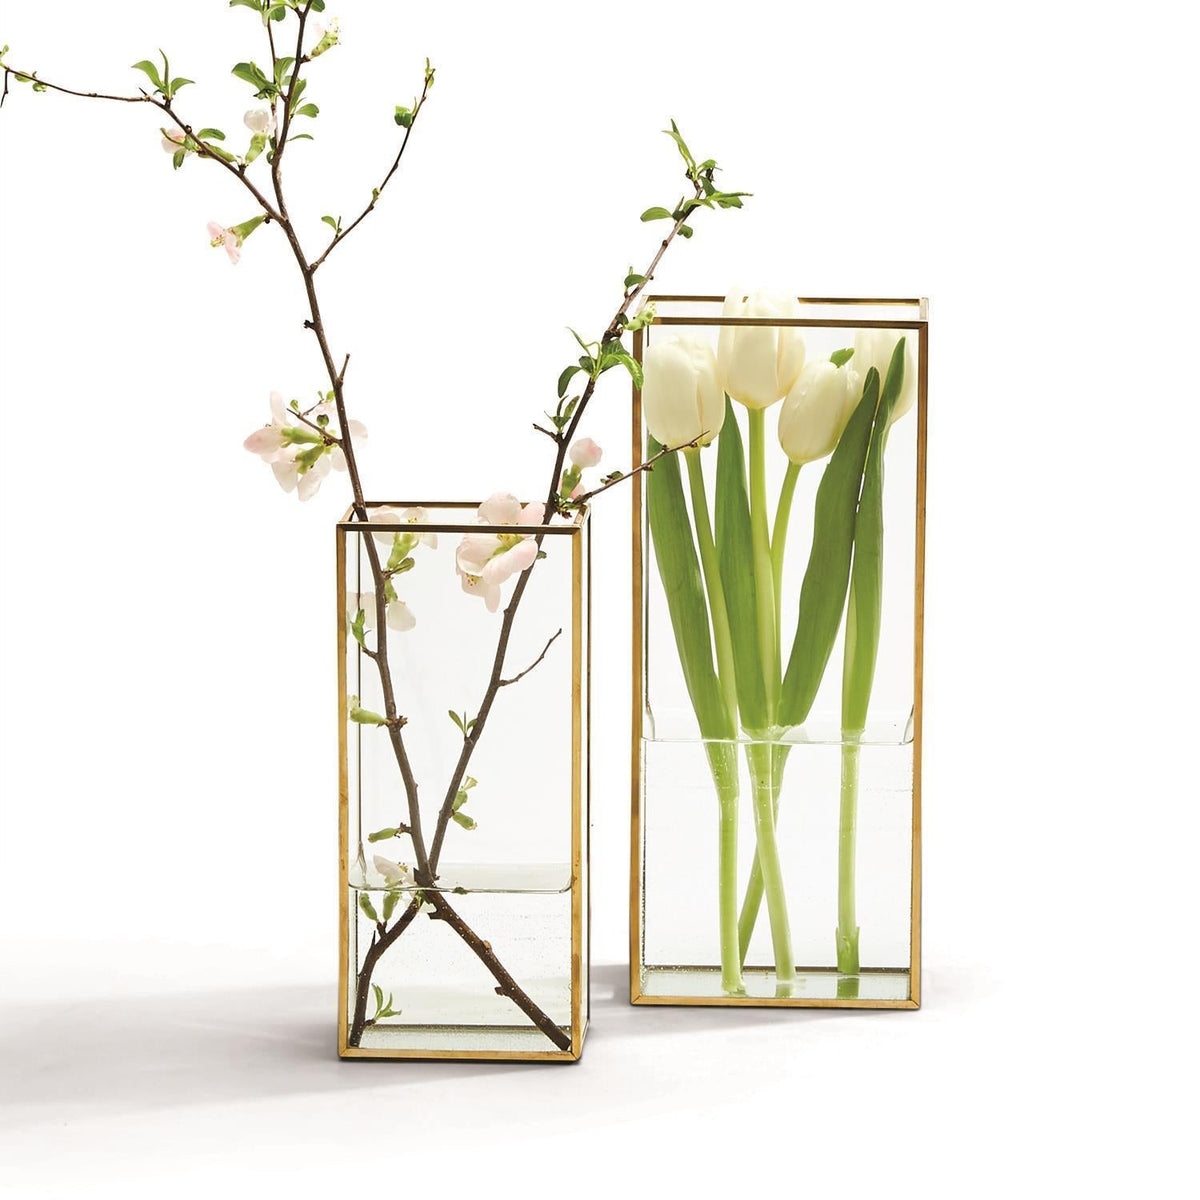 Two sizes of rectangular window vases with flowers